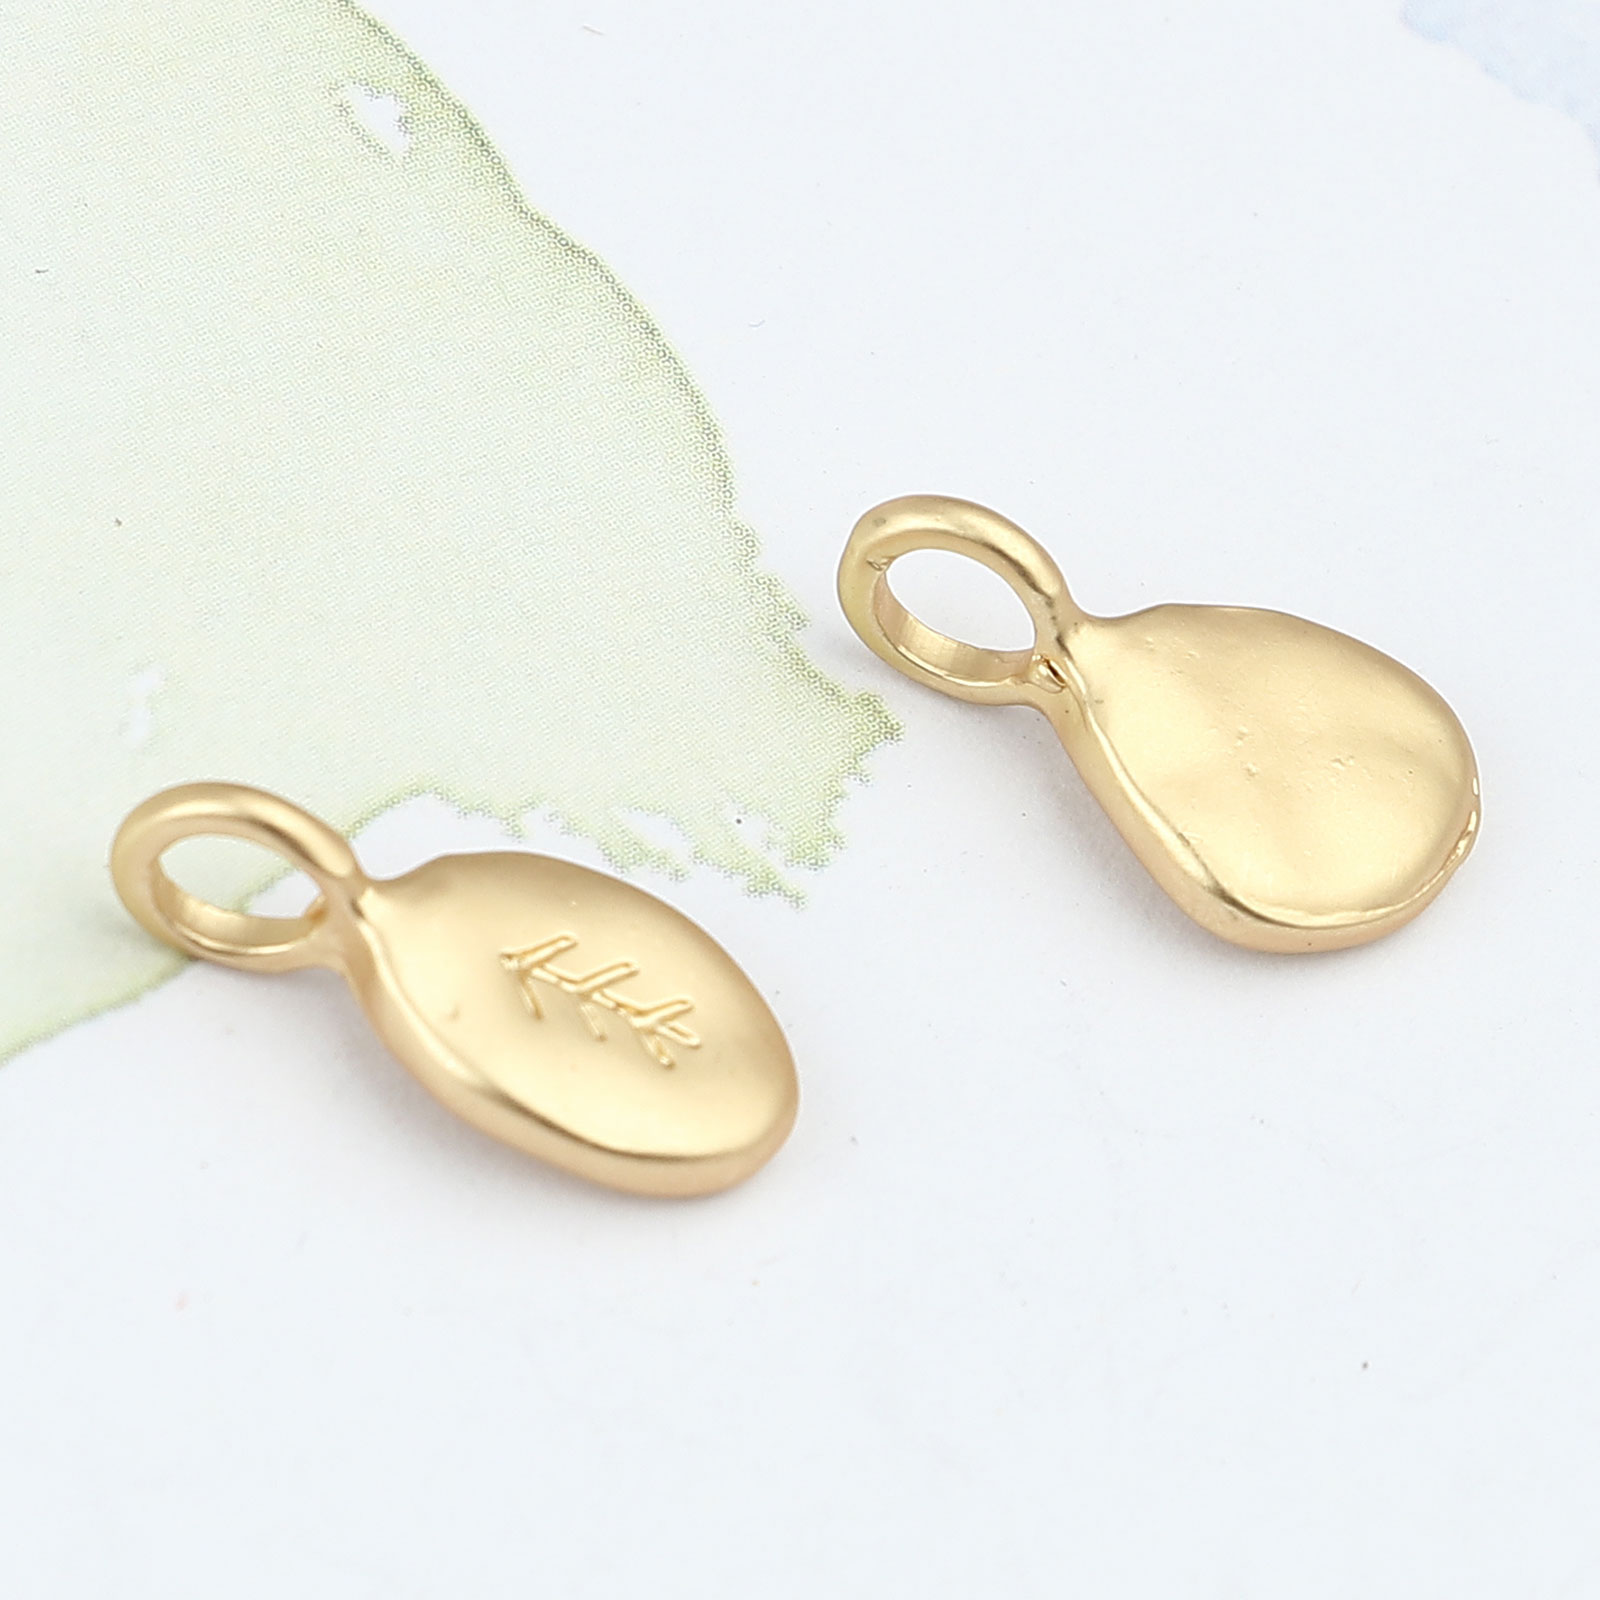 Picture of Zinc Based Alloy Charms Oval Matt Gold Leaf 17mm x 8mm, 10 PCs